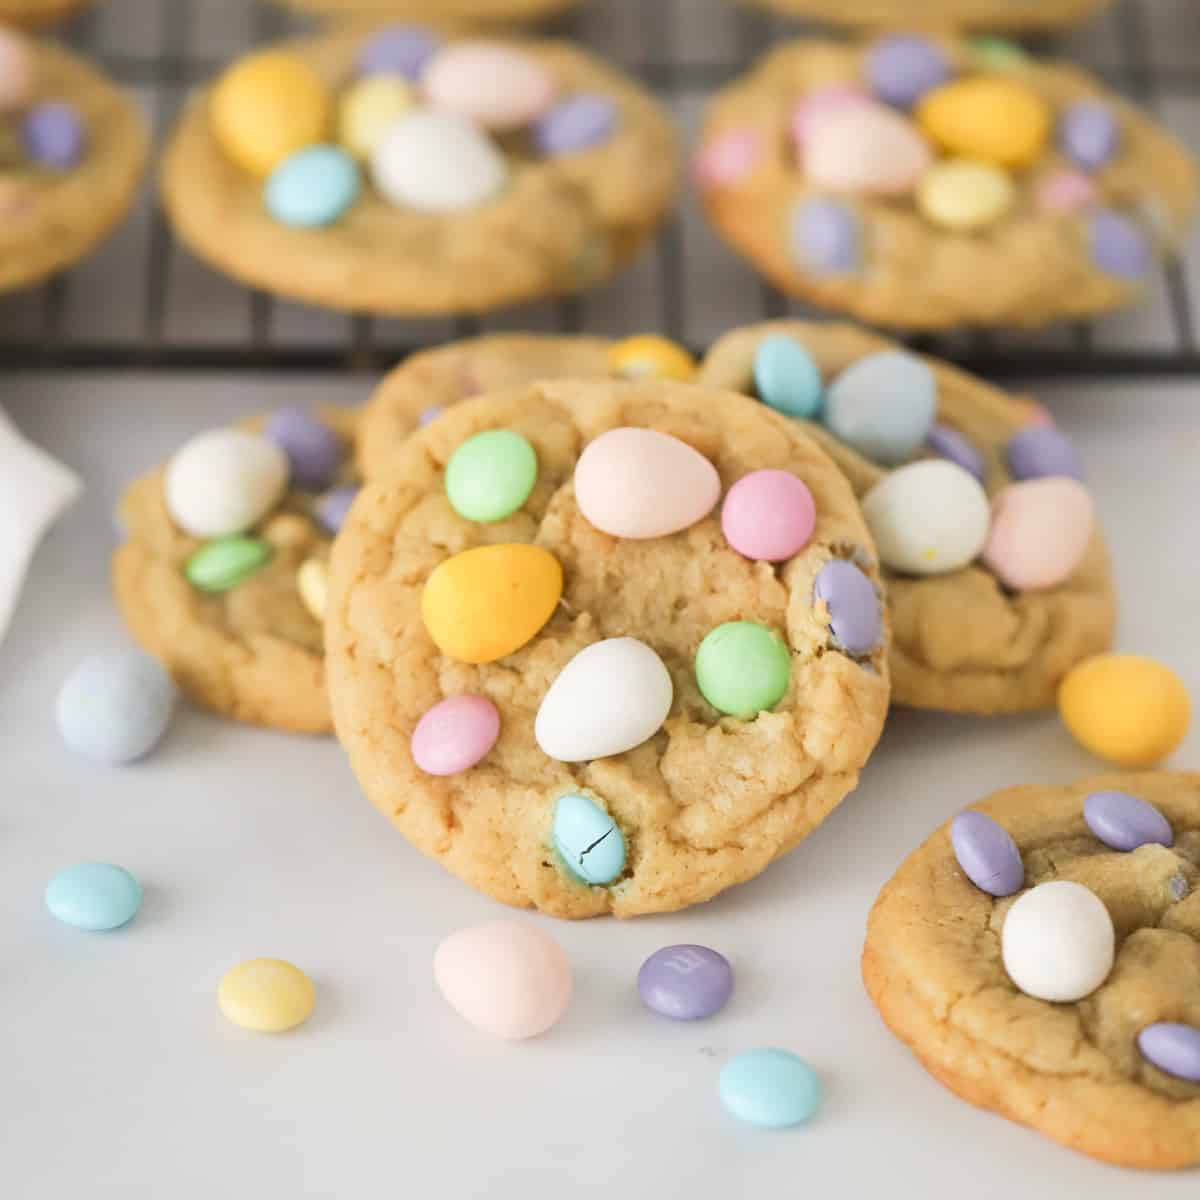 easy cadbury cookies with m and m's and cadbury eggs.